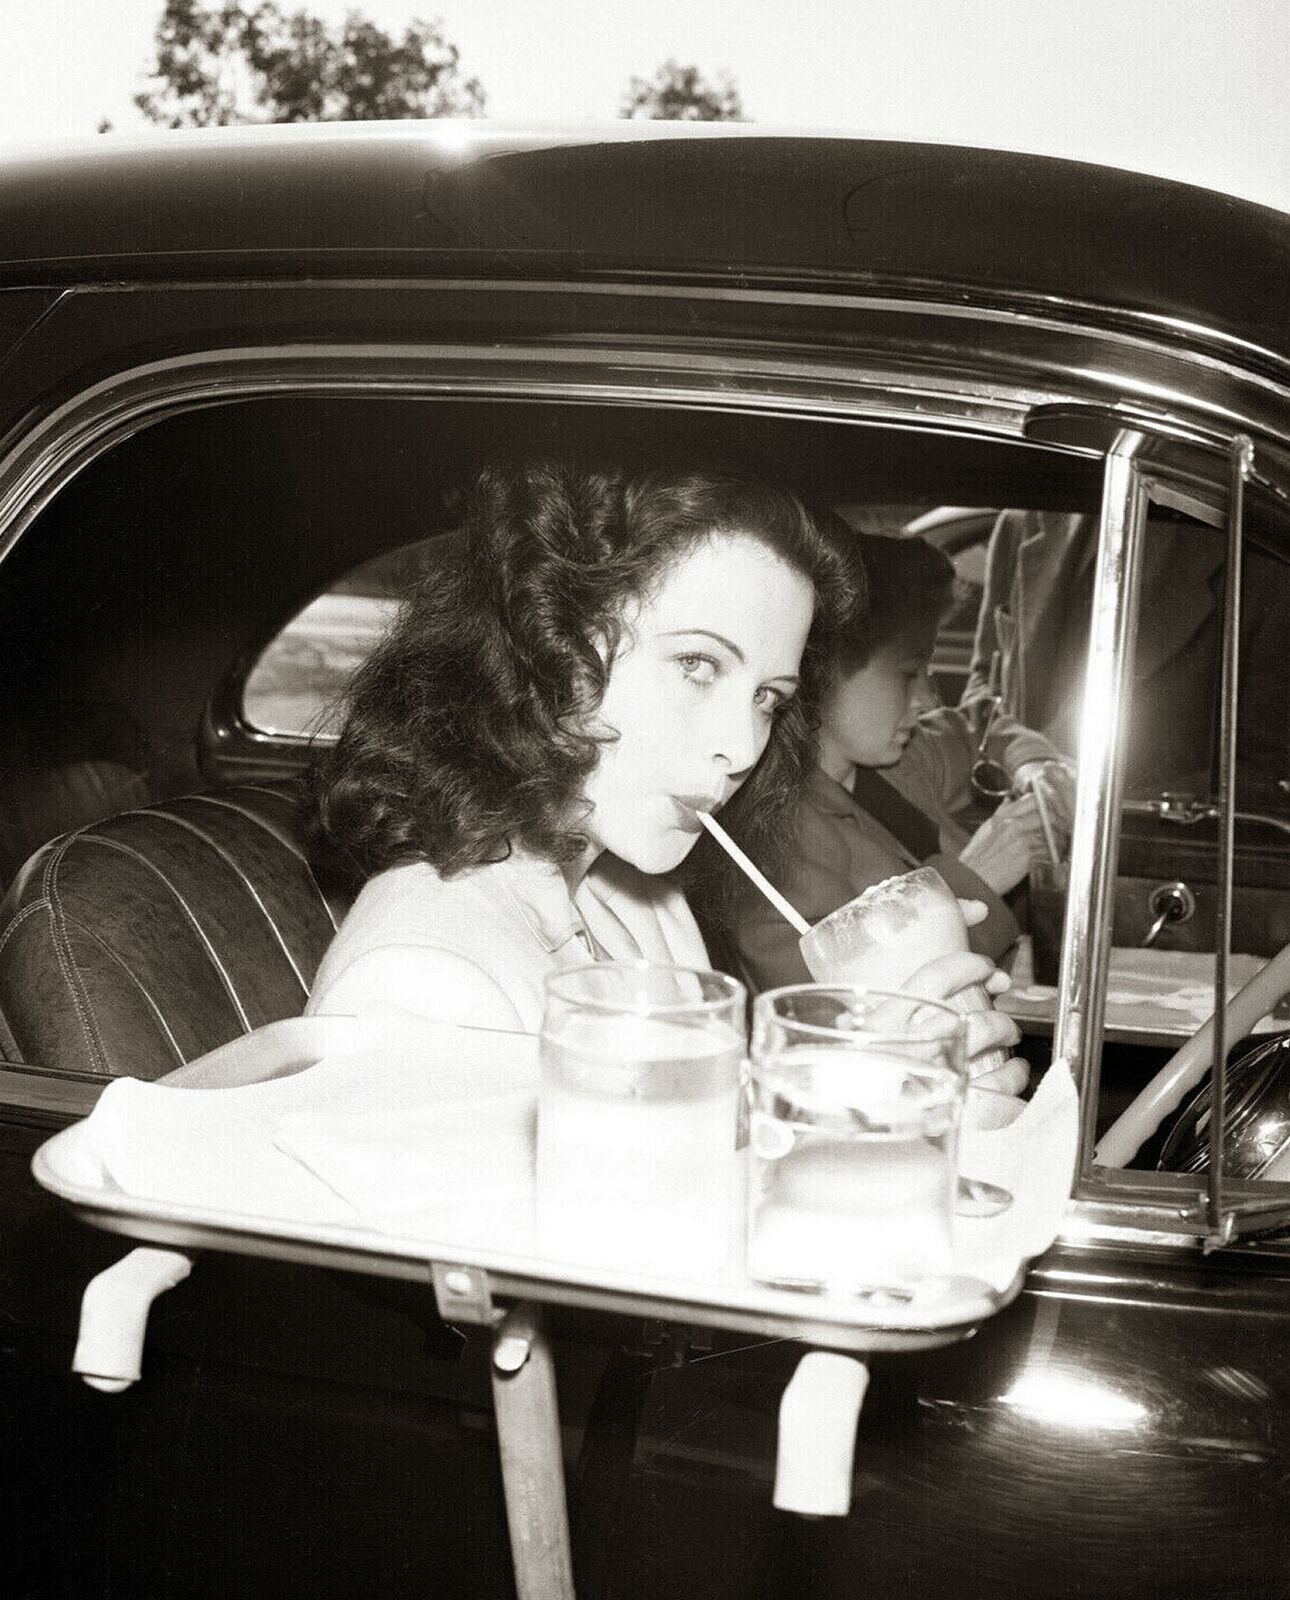 Actress HEDY LAMARR at the Drive In Classic Retro Picture Photo 5x7